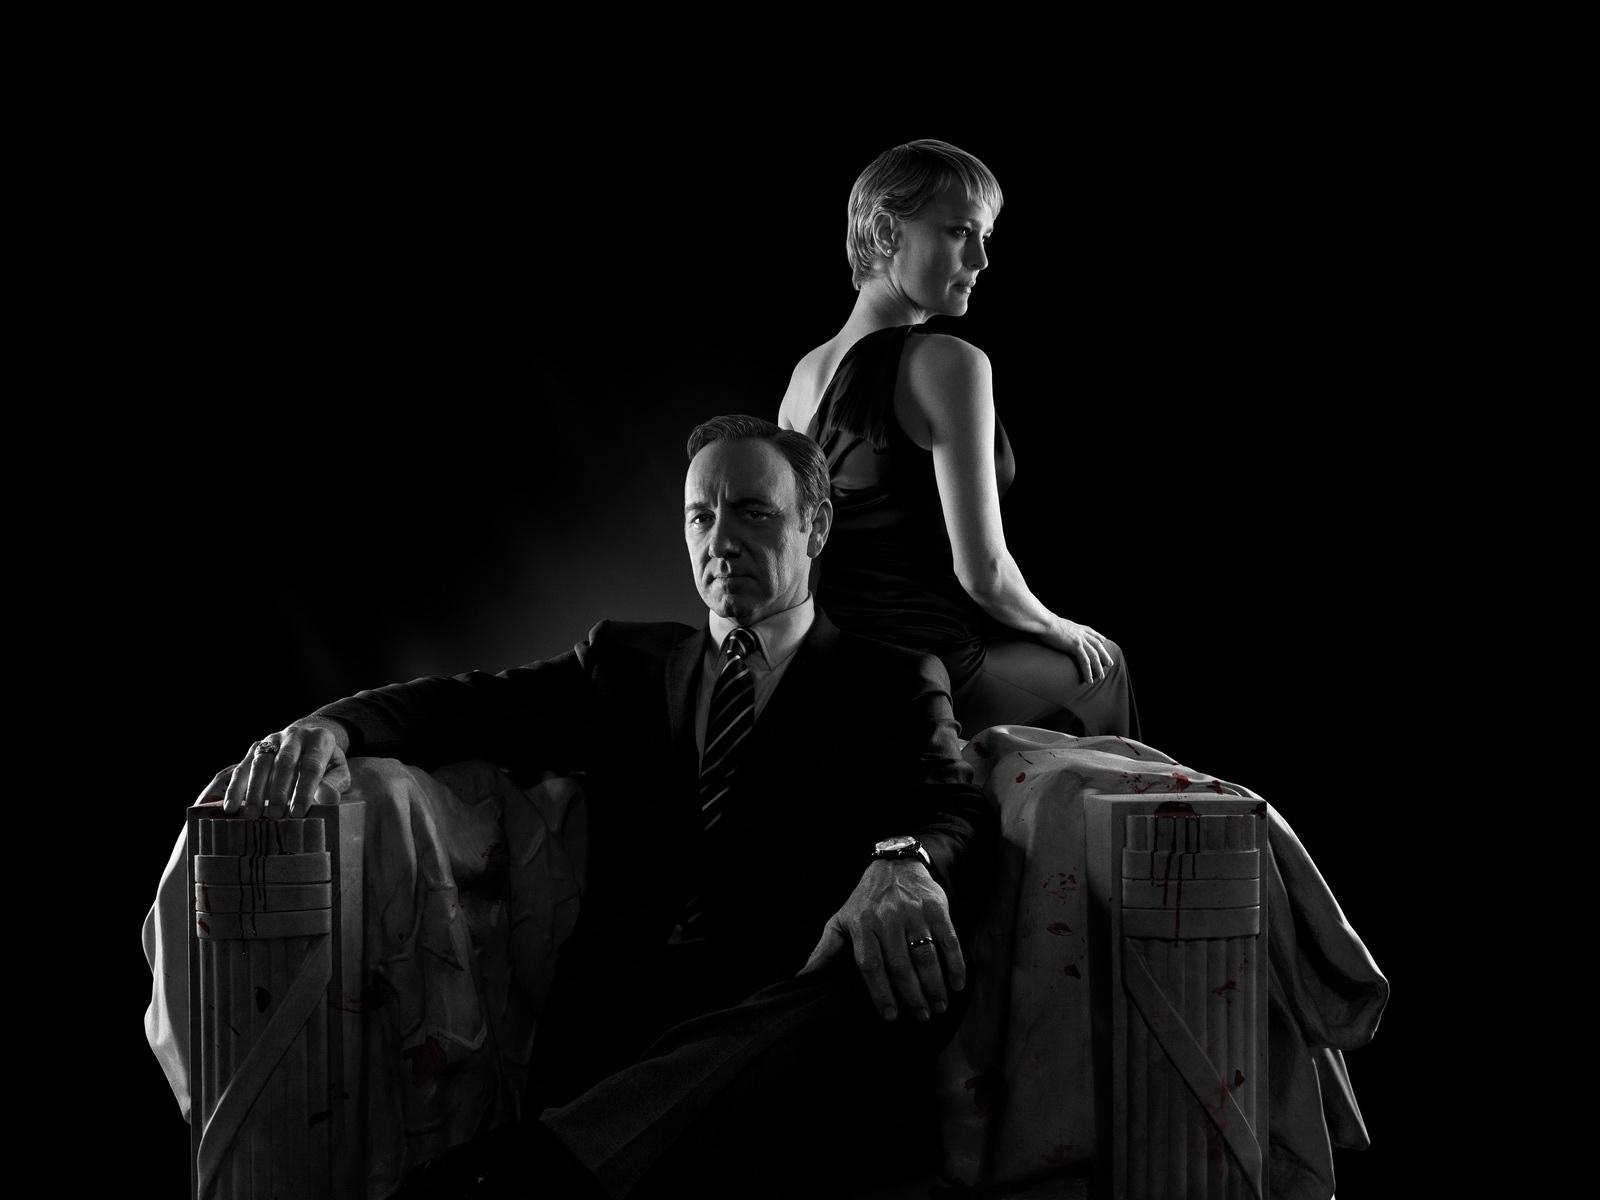 Download wallpaper 1600x1200 house of cards, robin wright, claire